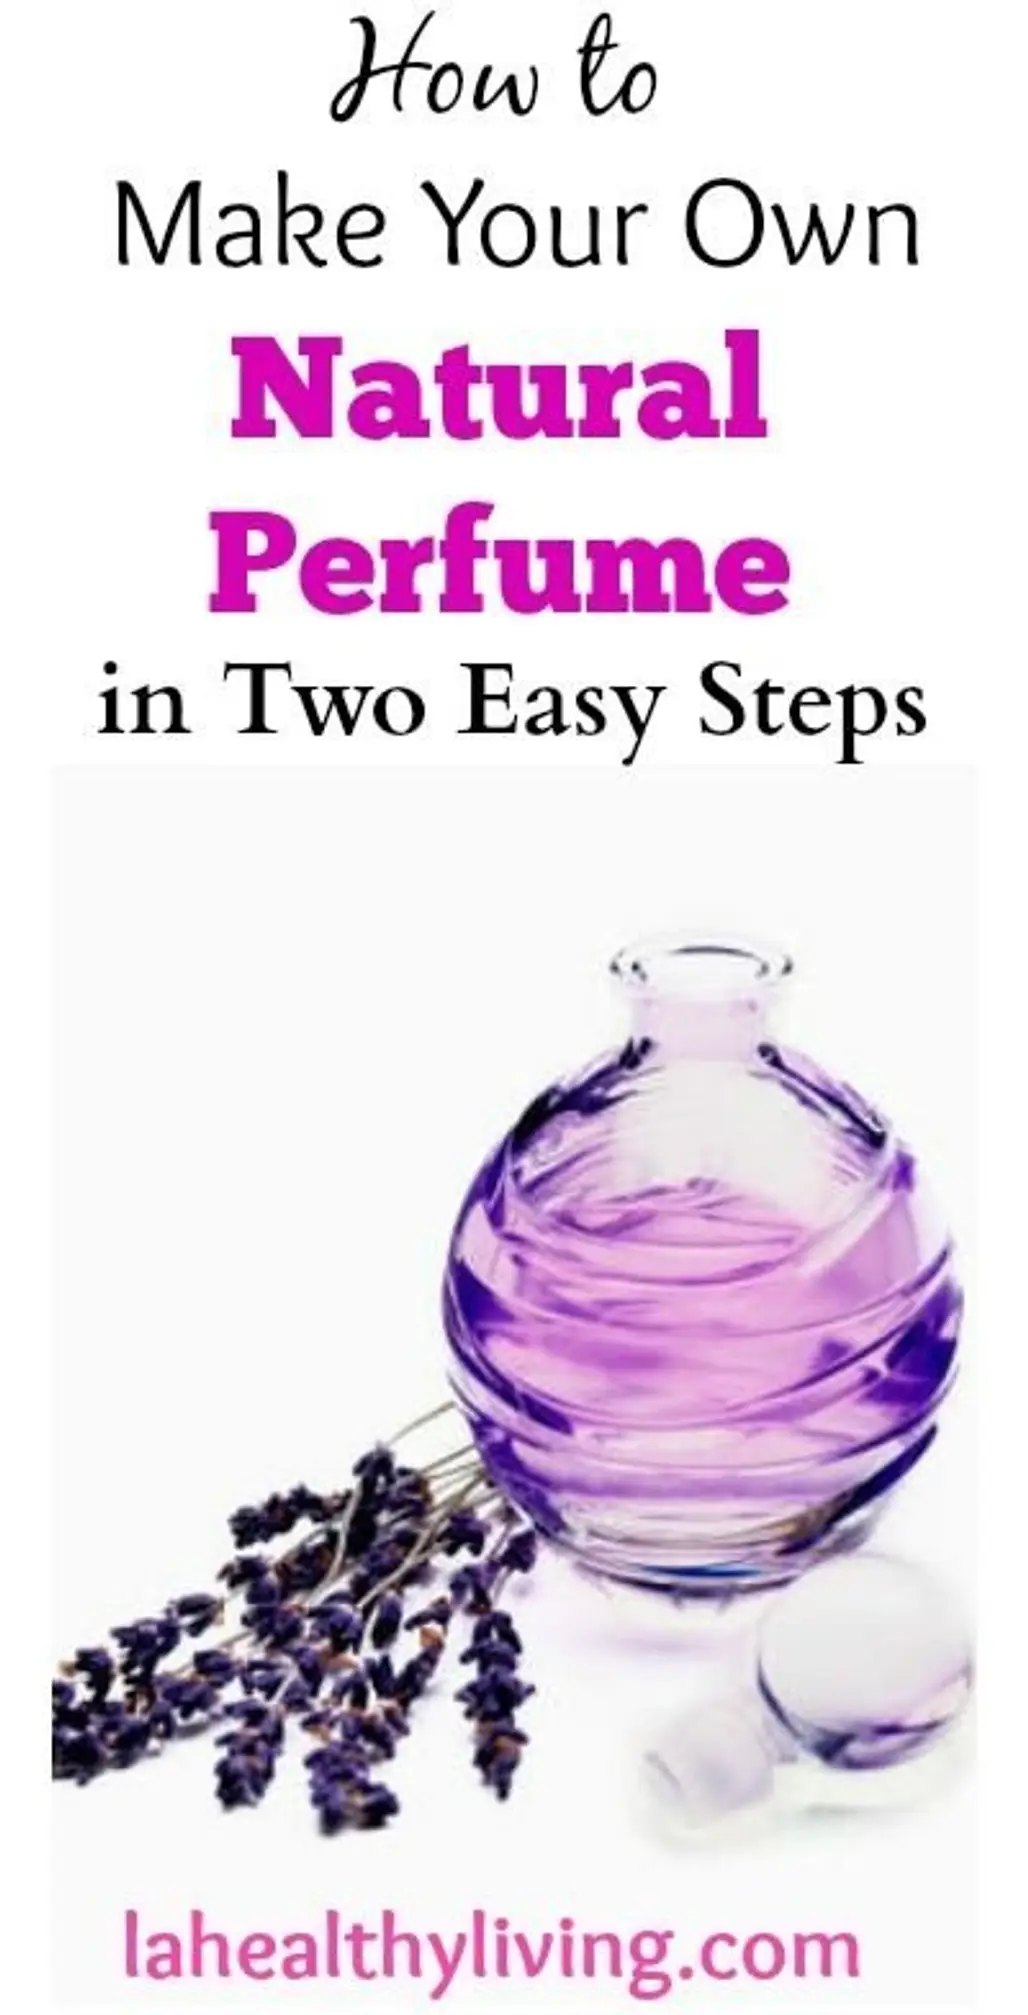 How to Make Your Own Natural Perfume